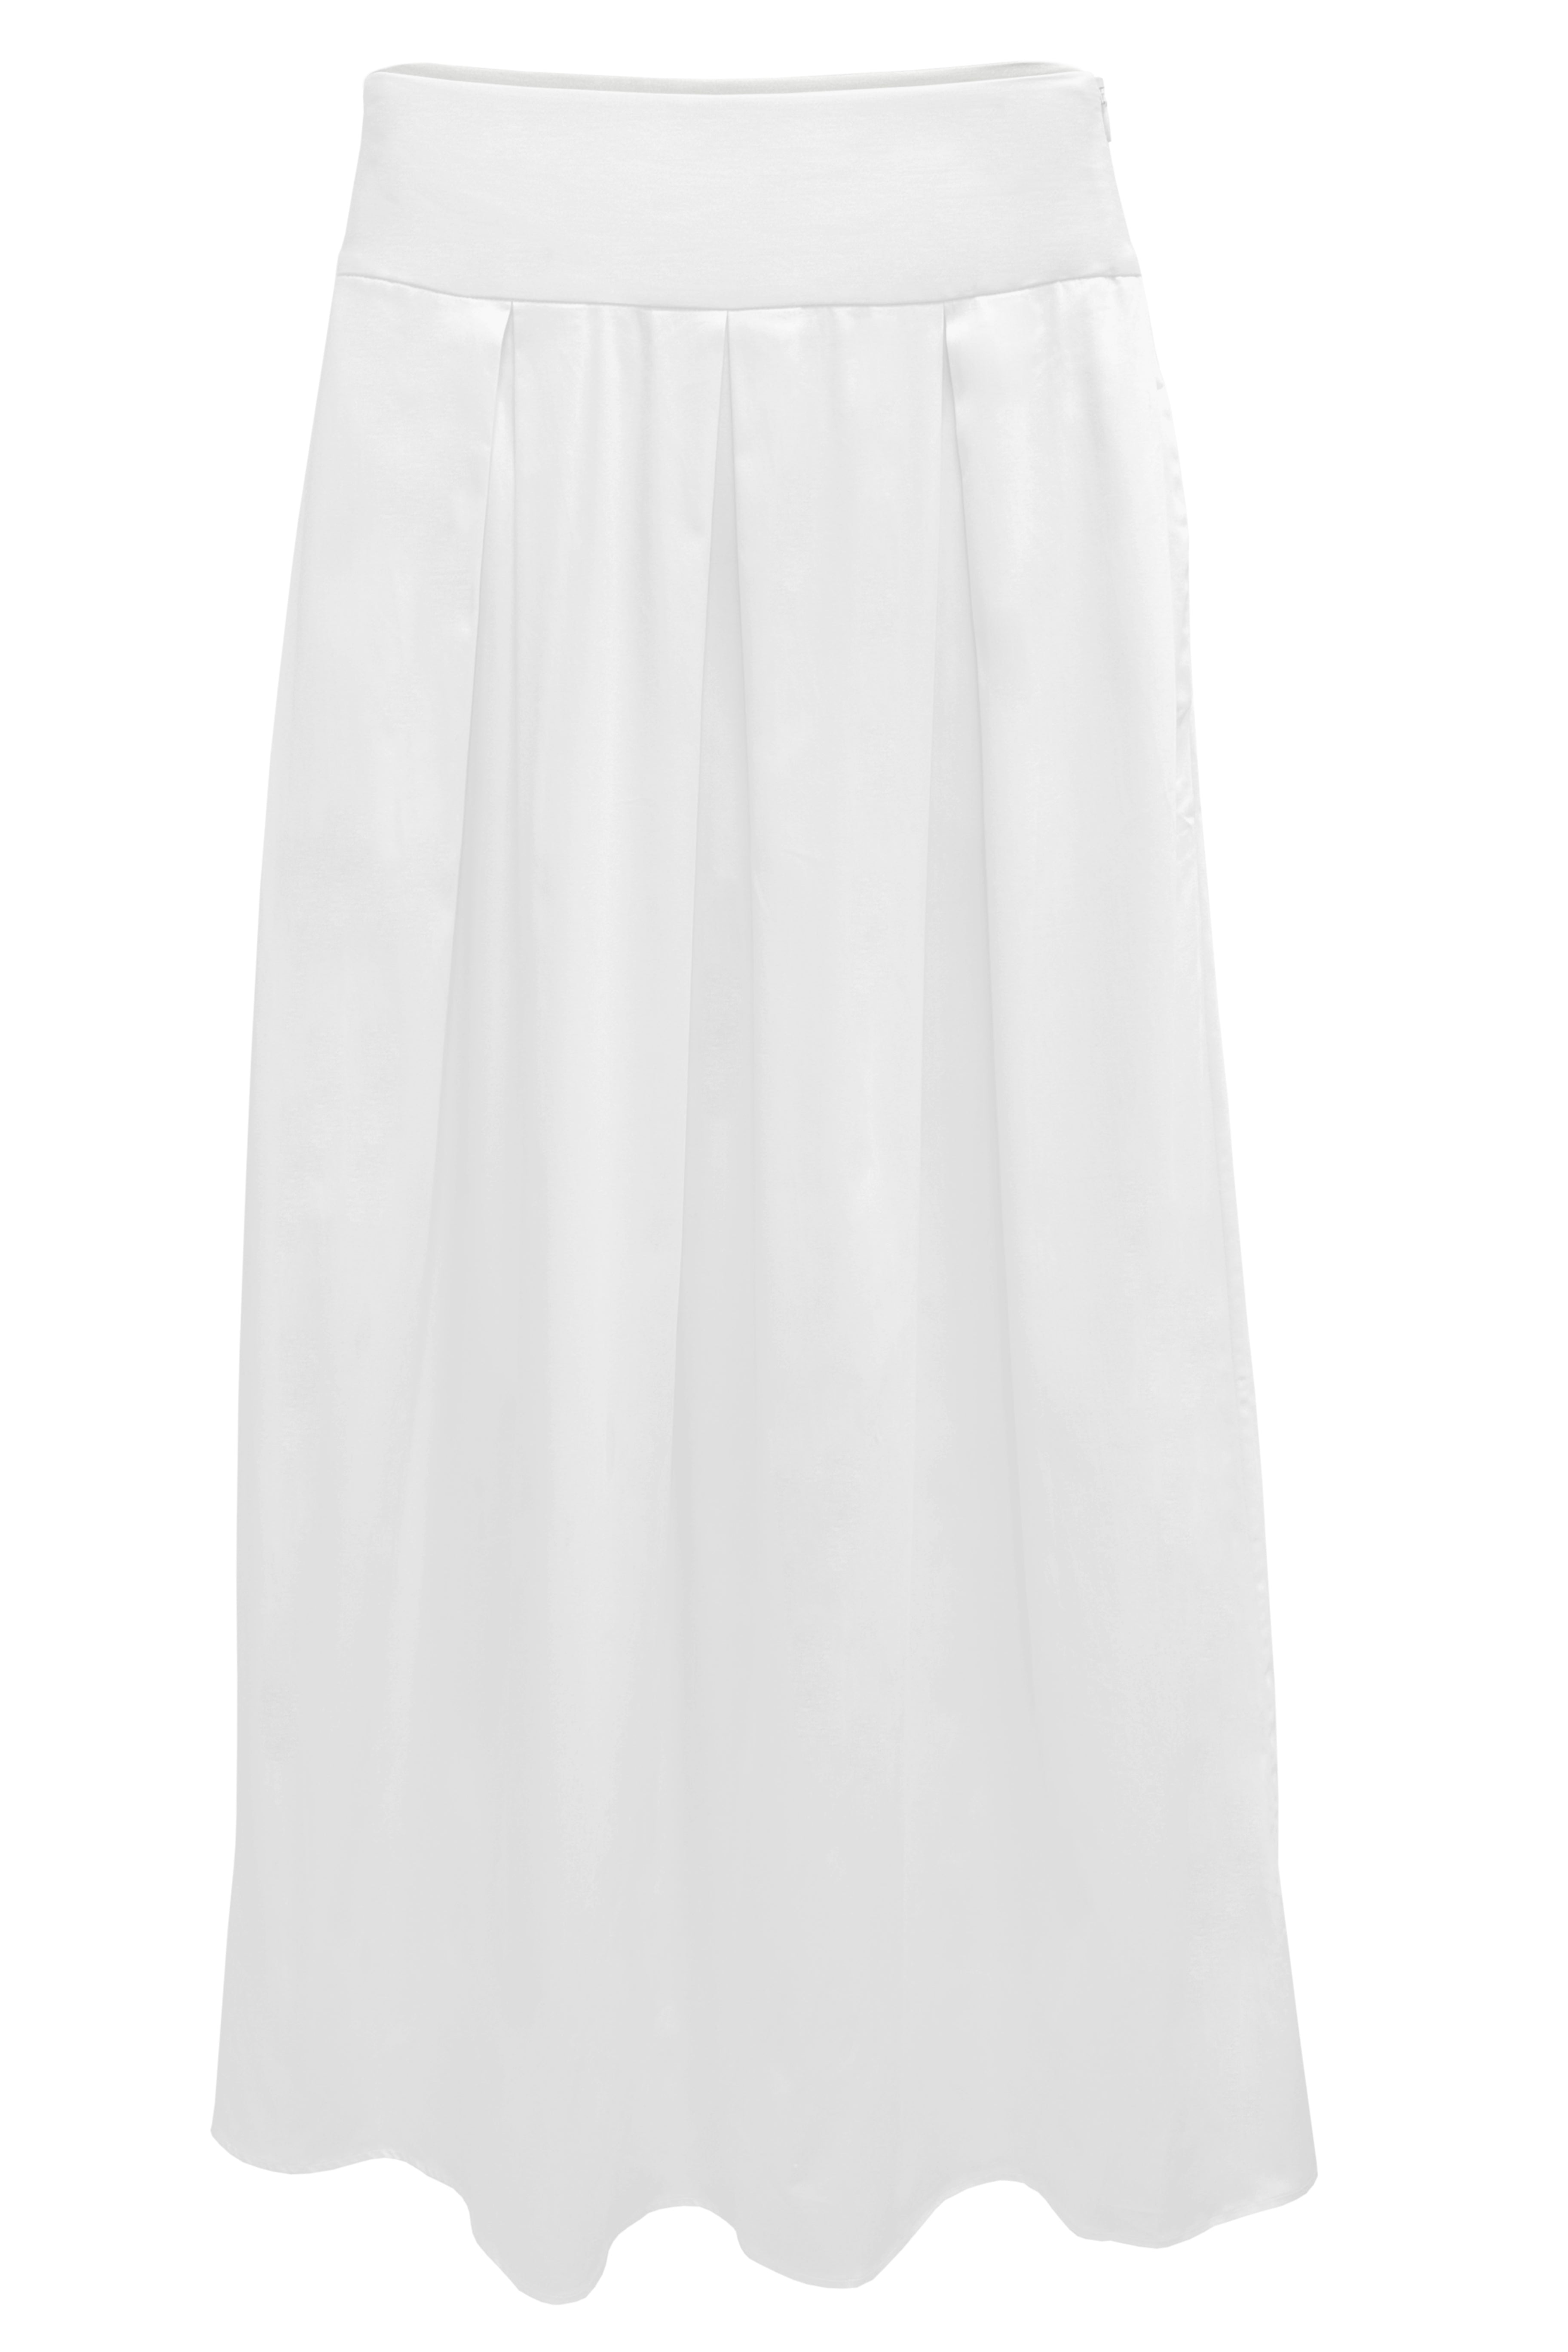 Solid Pleated Long Skirt Product